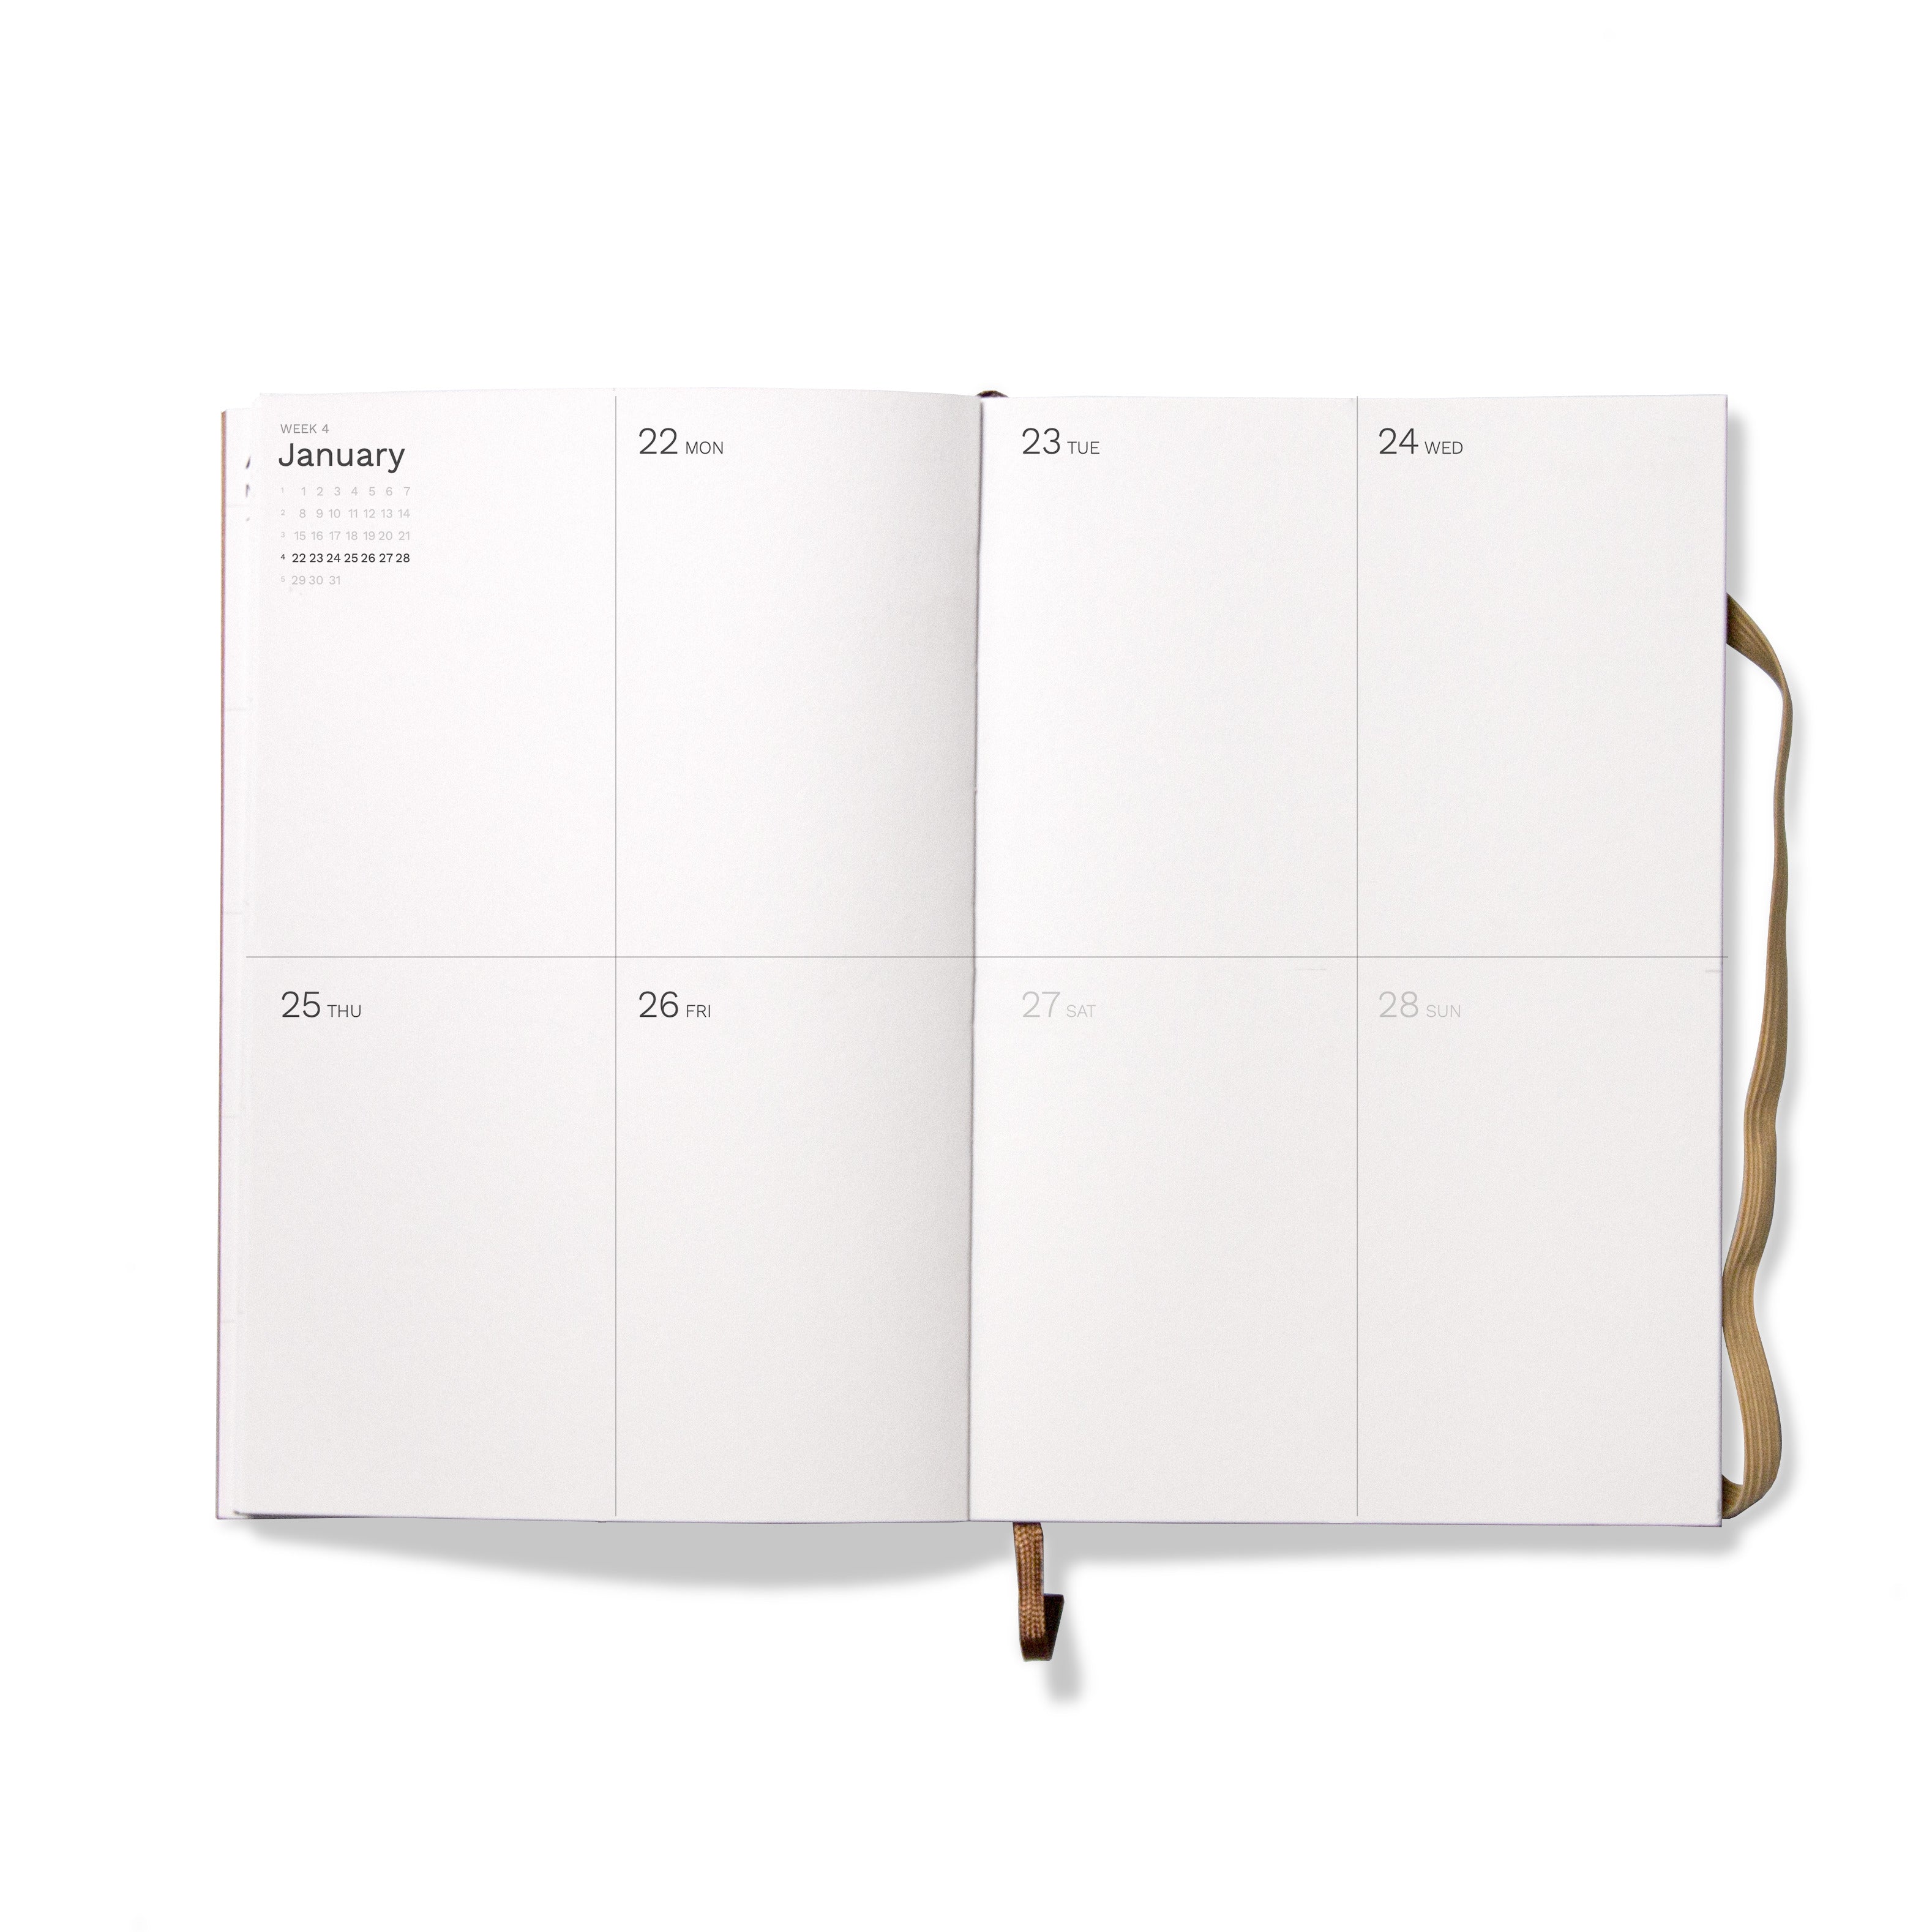 Octàgon Design 2025 Large Weekly Planner A4 size, weekly template